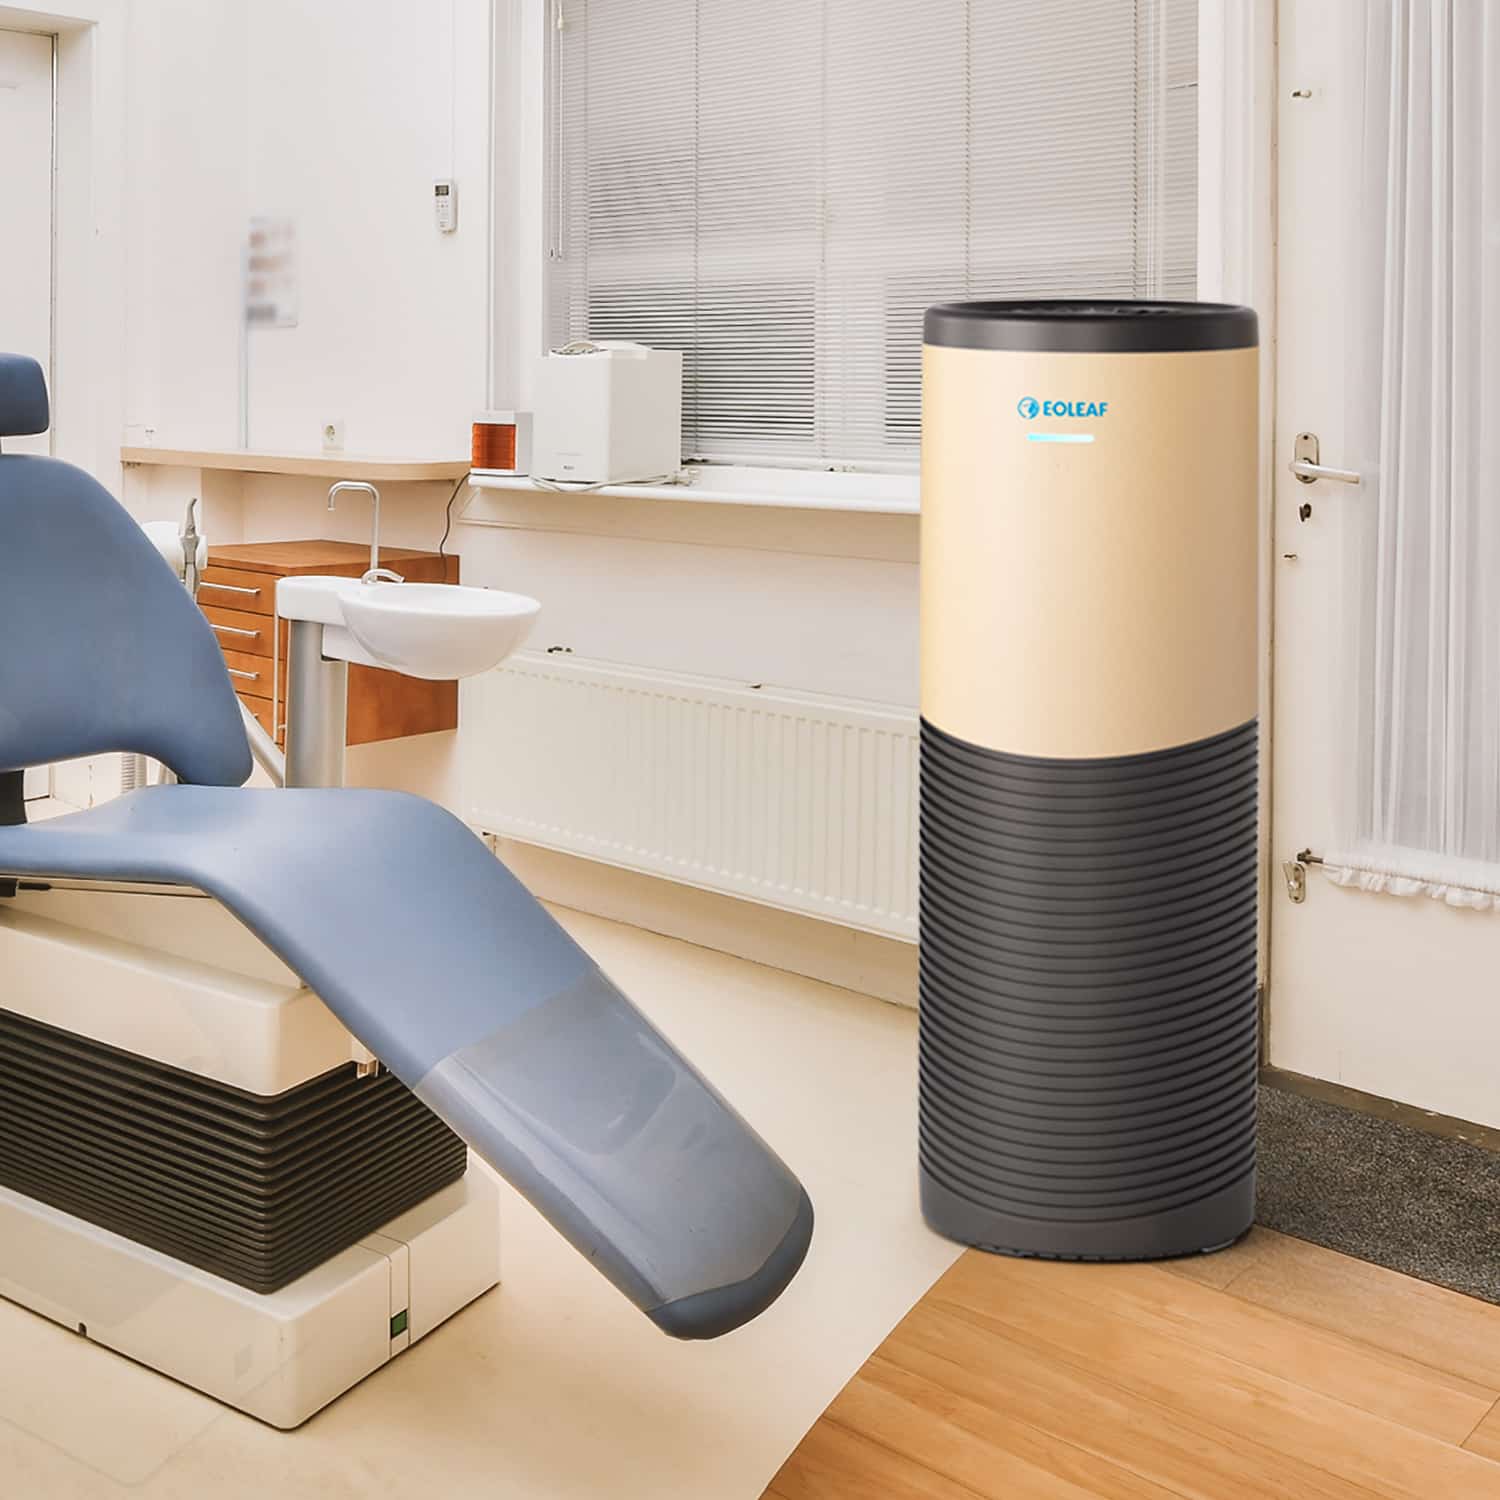 The AEROPRO 150 air purifier in a medical setting